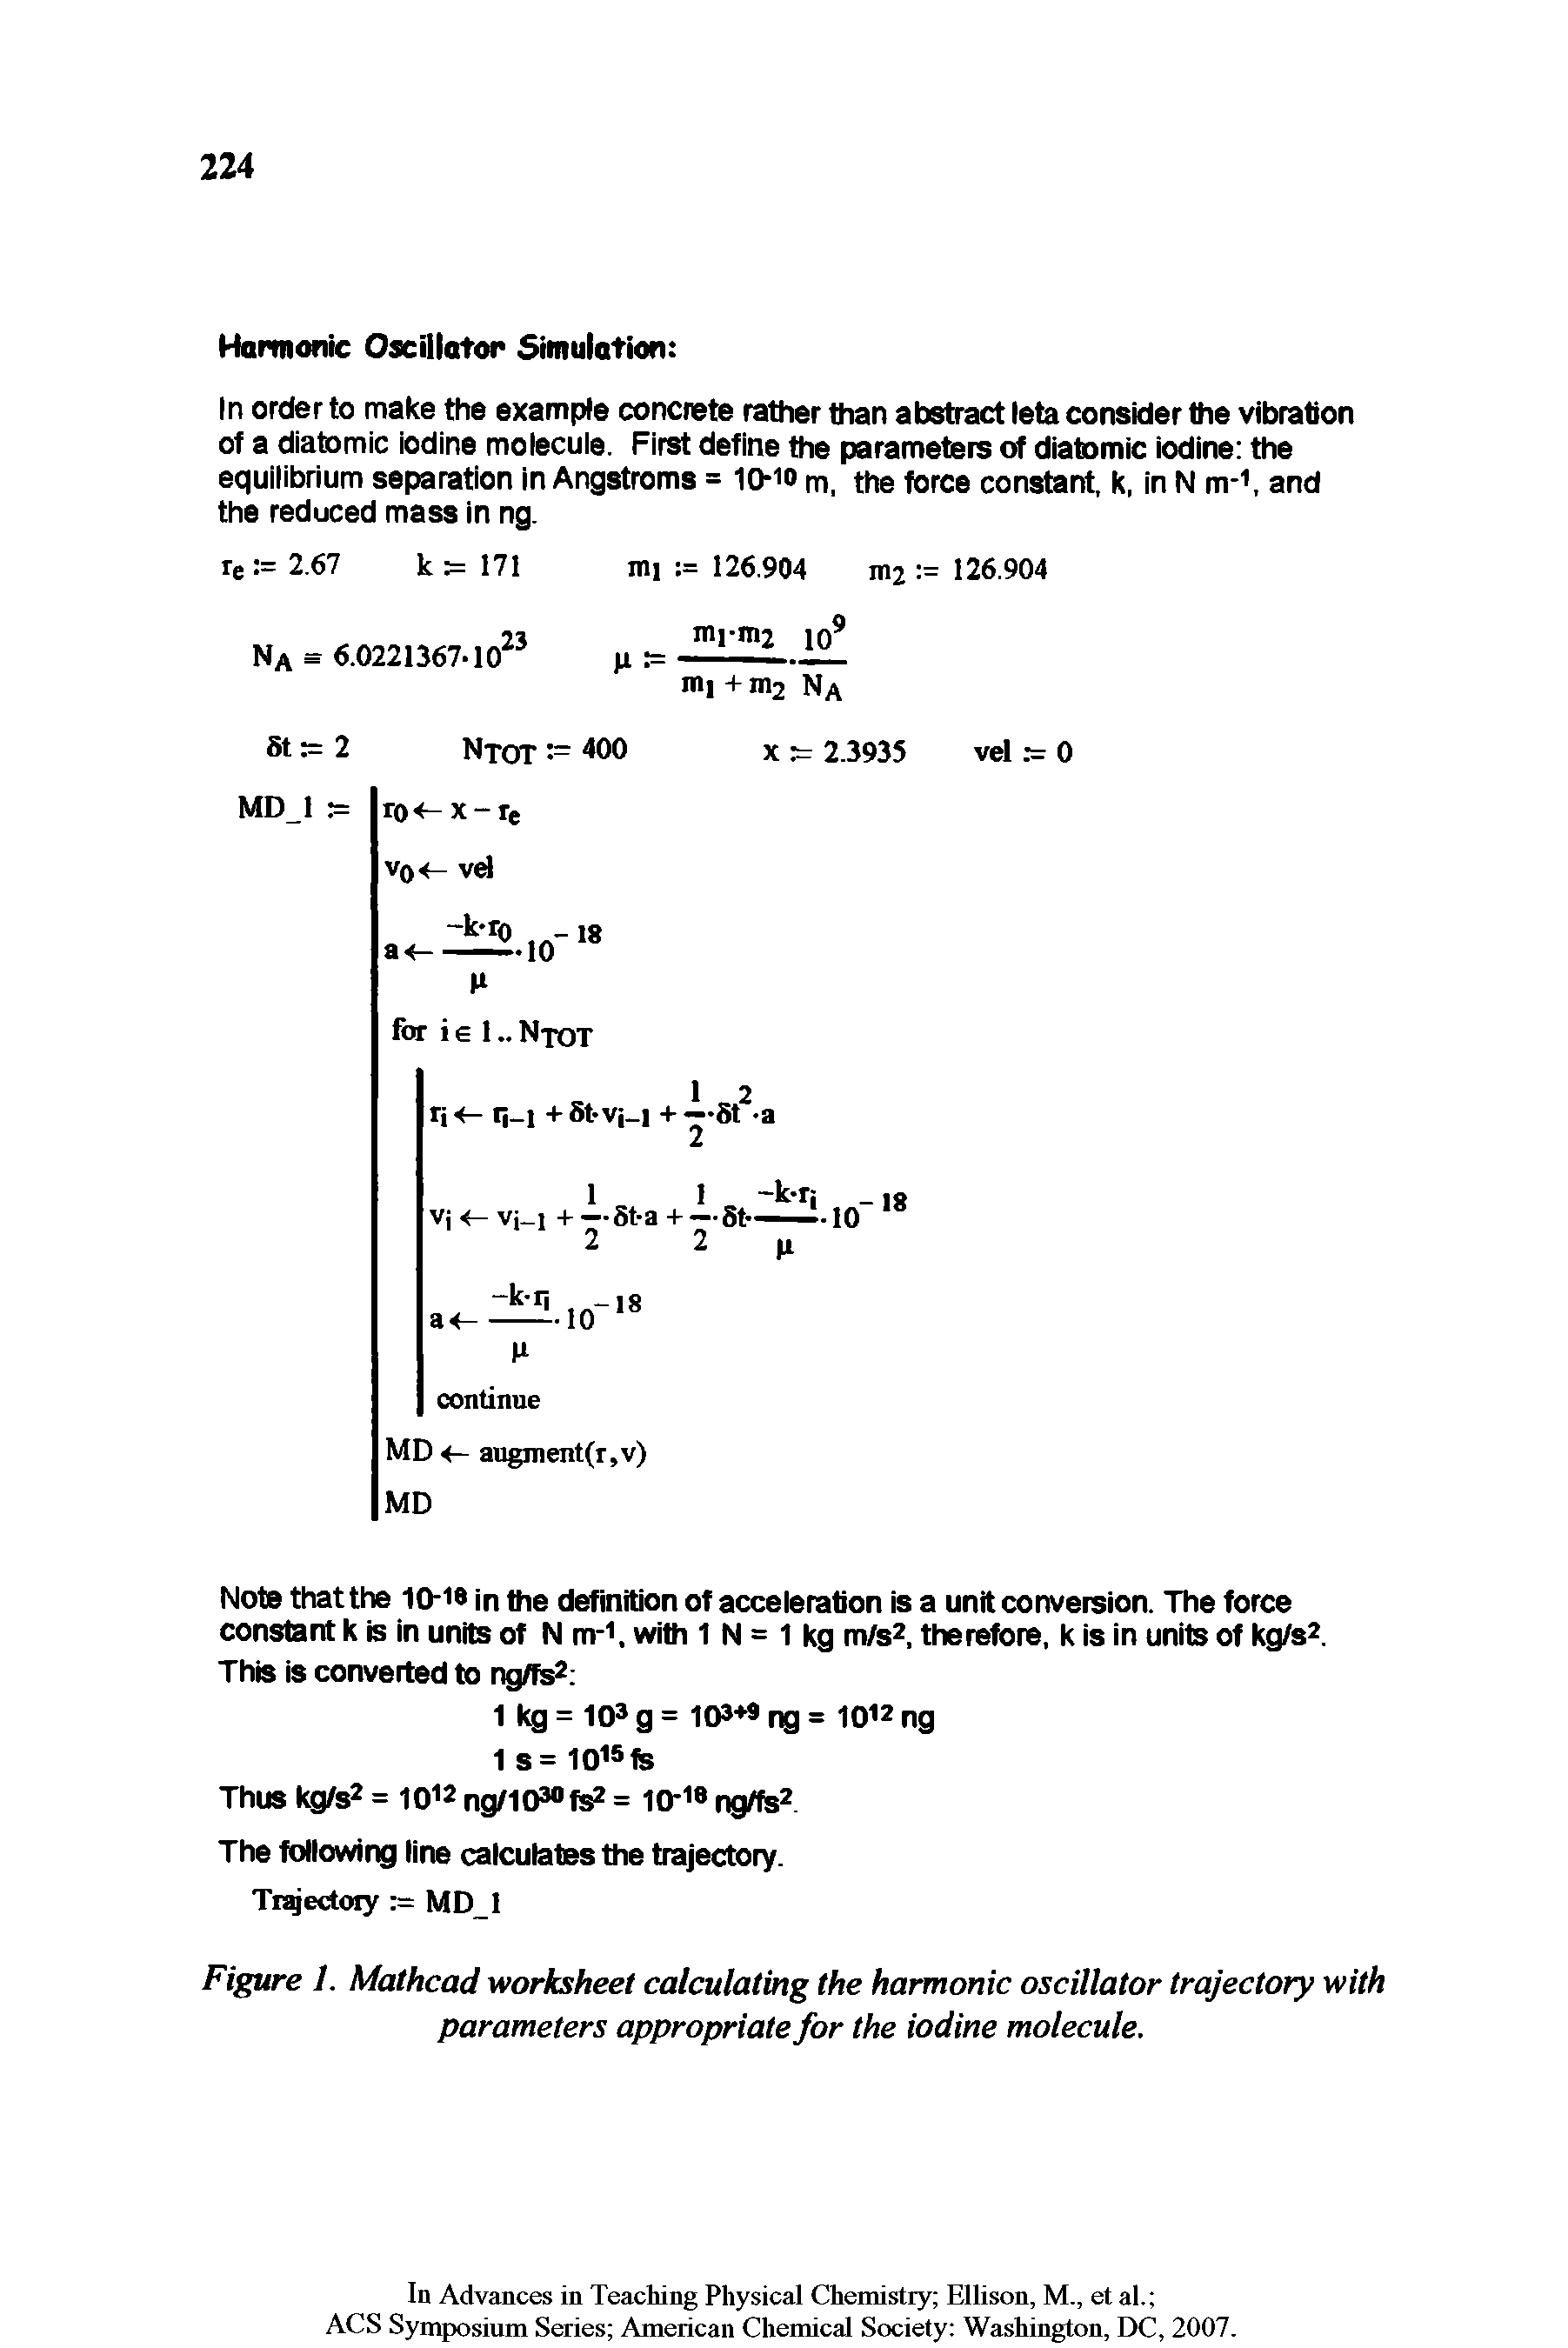 Figure 1. Mathcad worksheet calculating the harmonic oscillator trajectory with parameters appropriate for the iodine molecule.